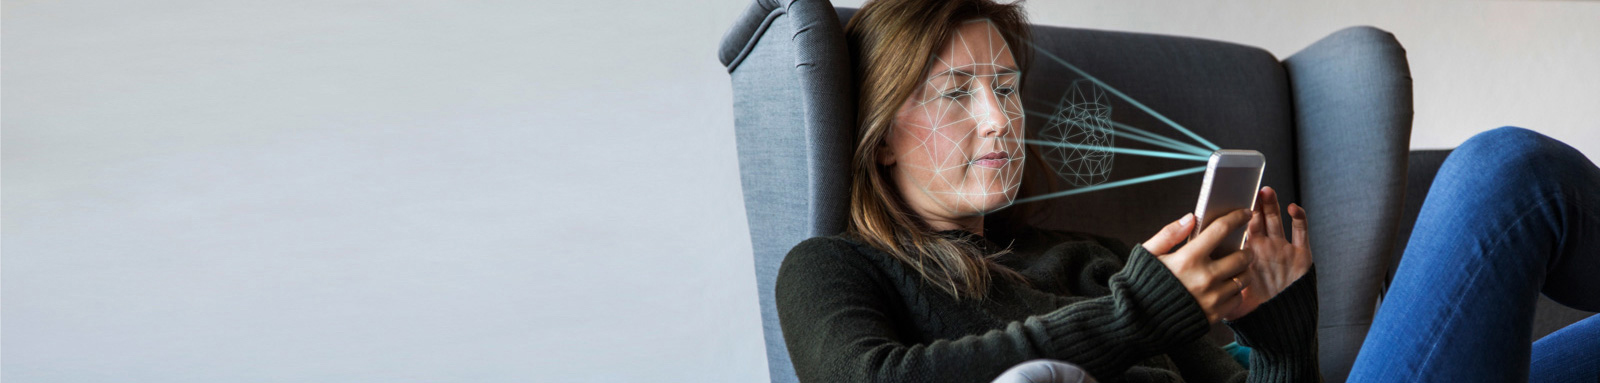 Woman sitting on chair with mobile phone using face recognition